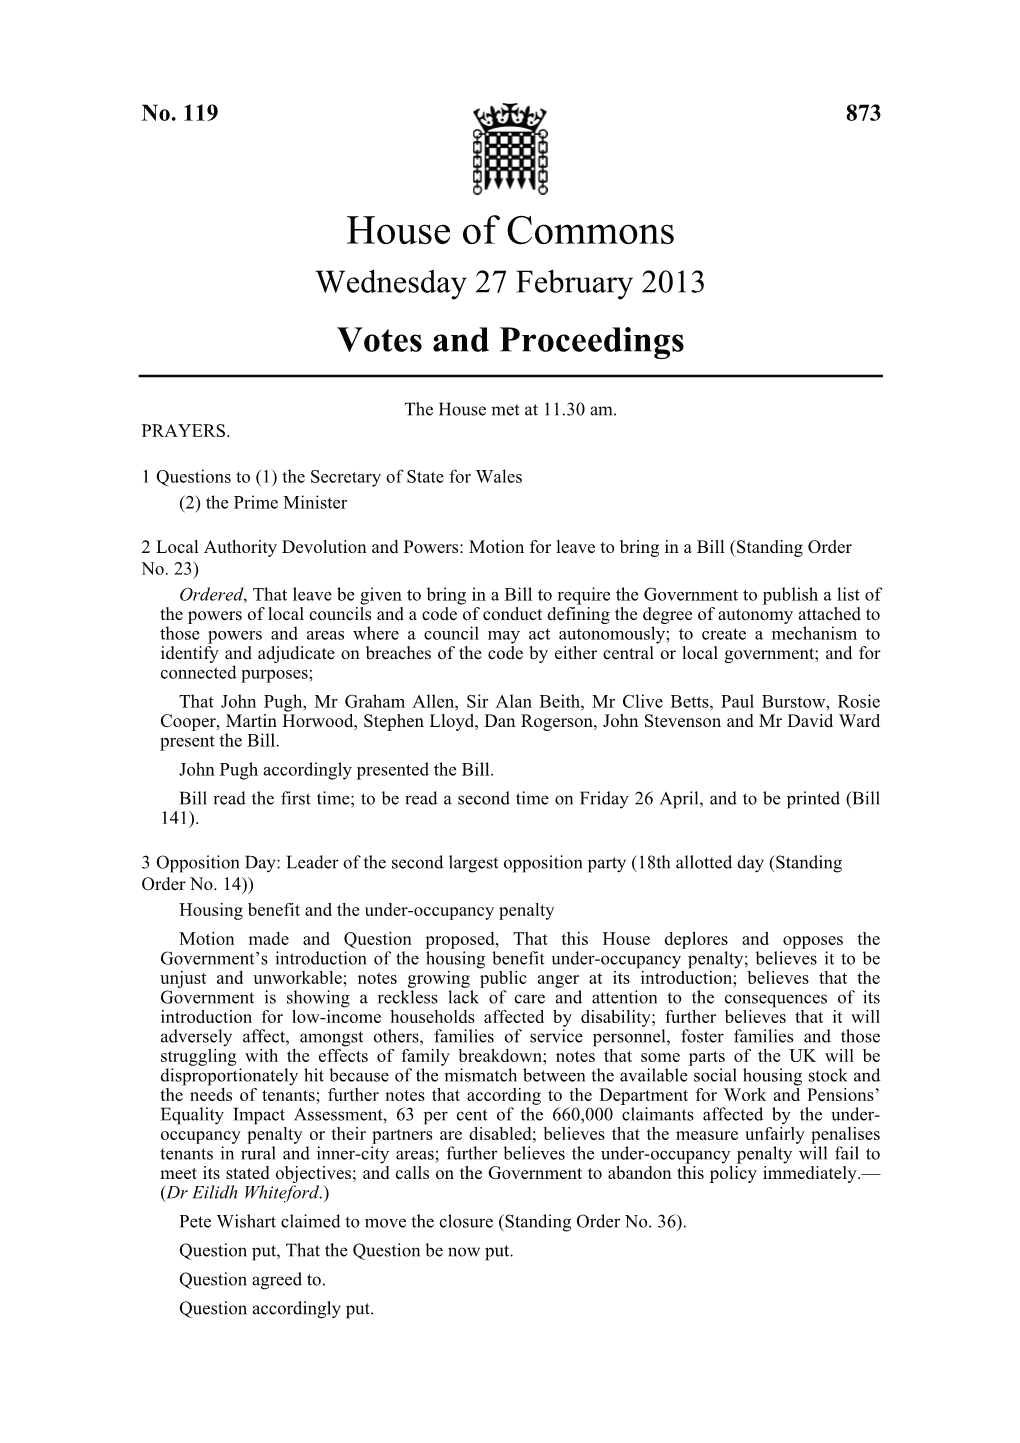 House of Commons Wednesday 27 February 2013 Votes and Proceedings